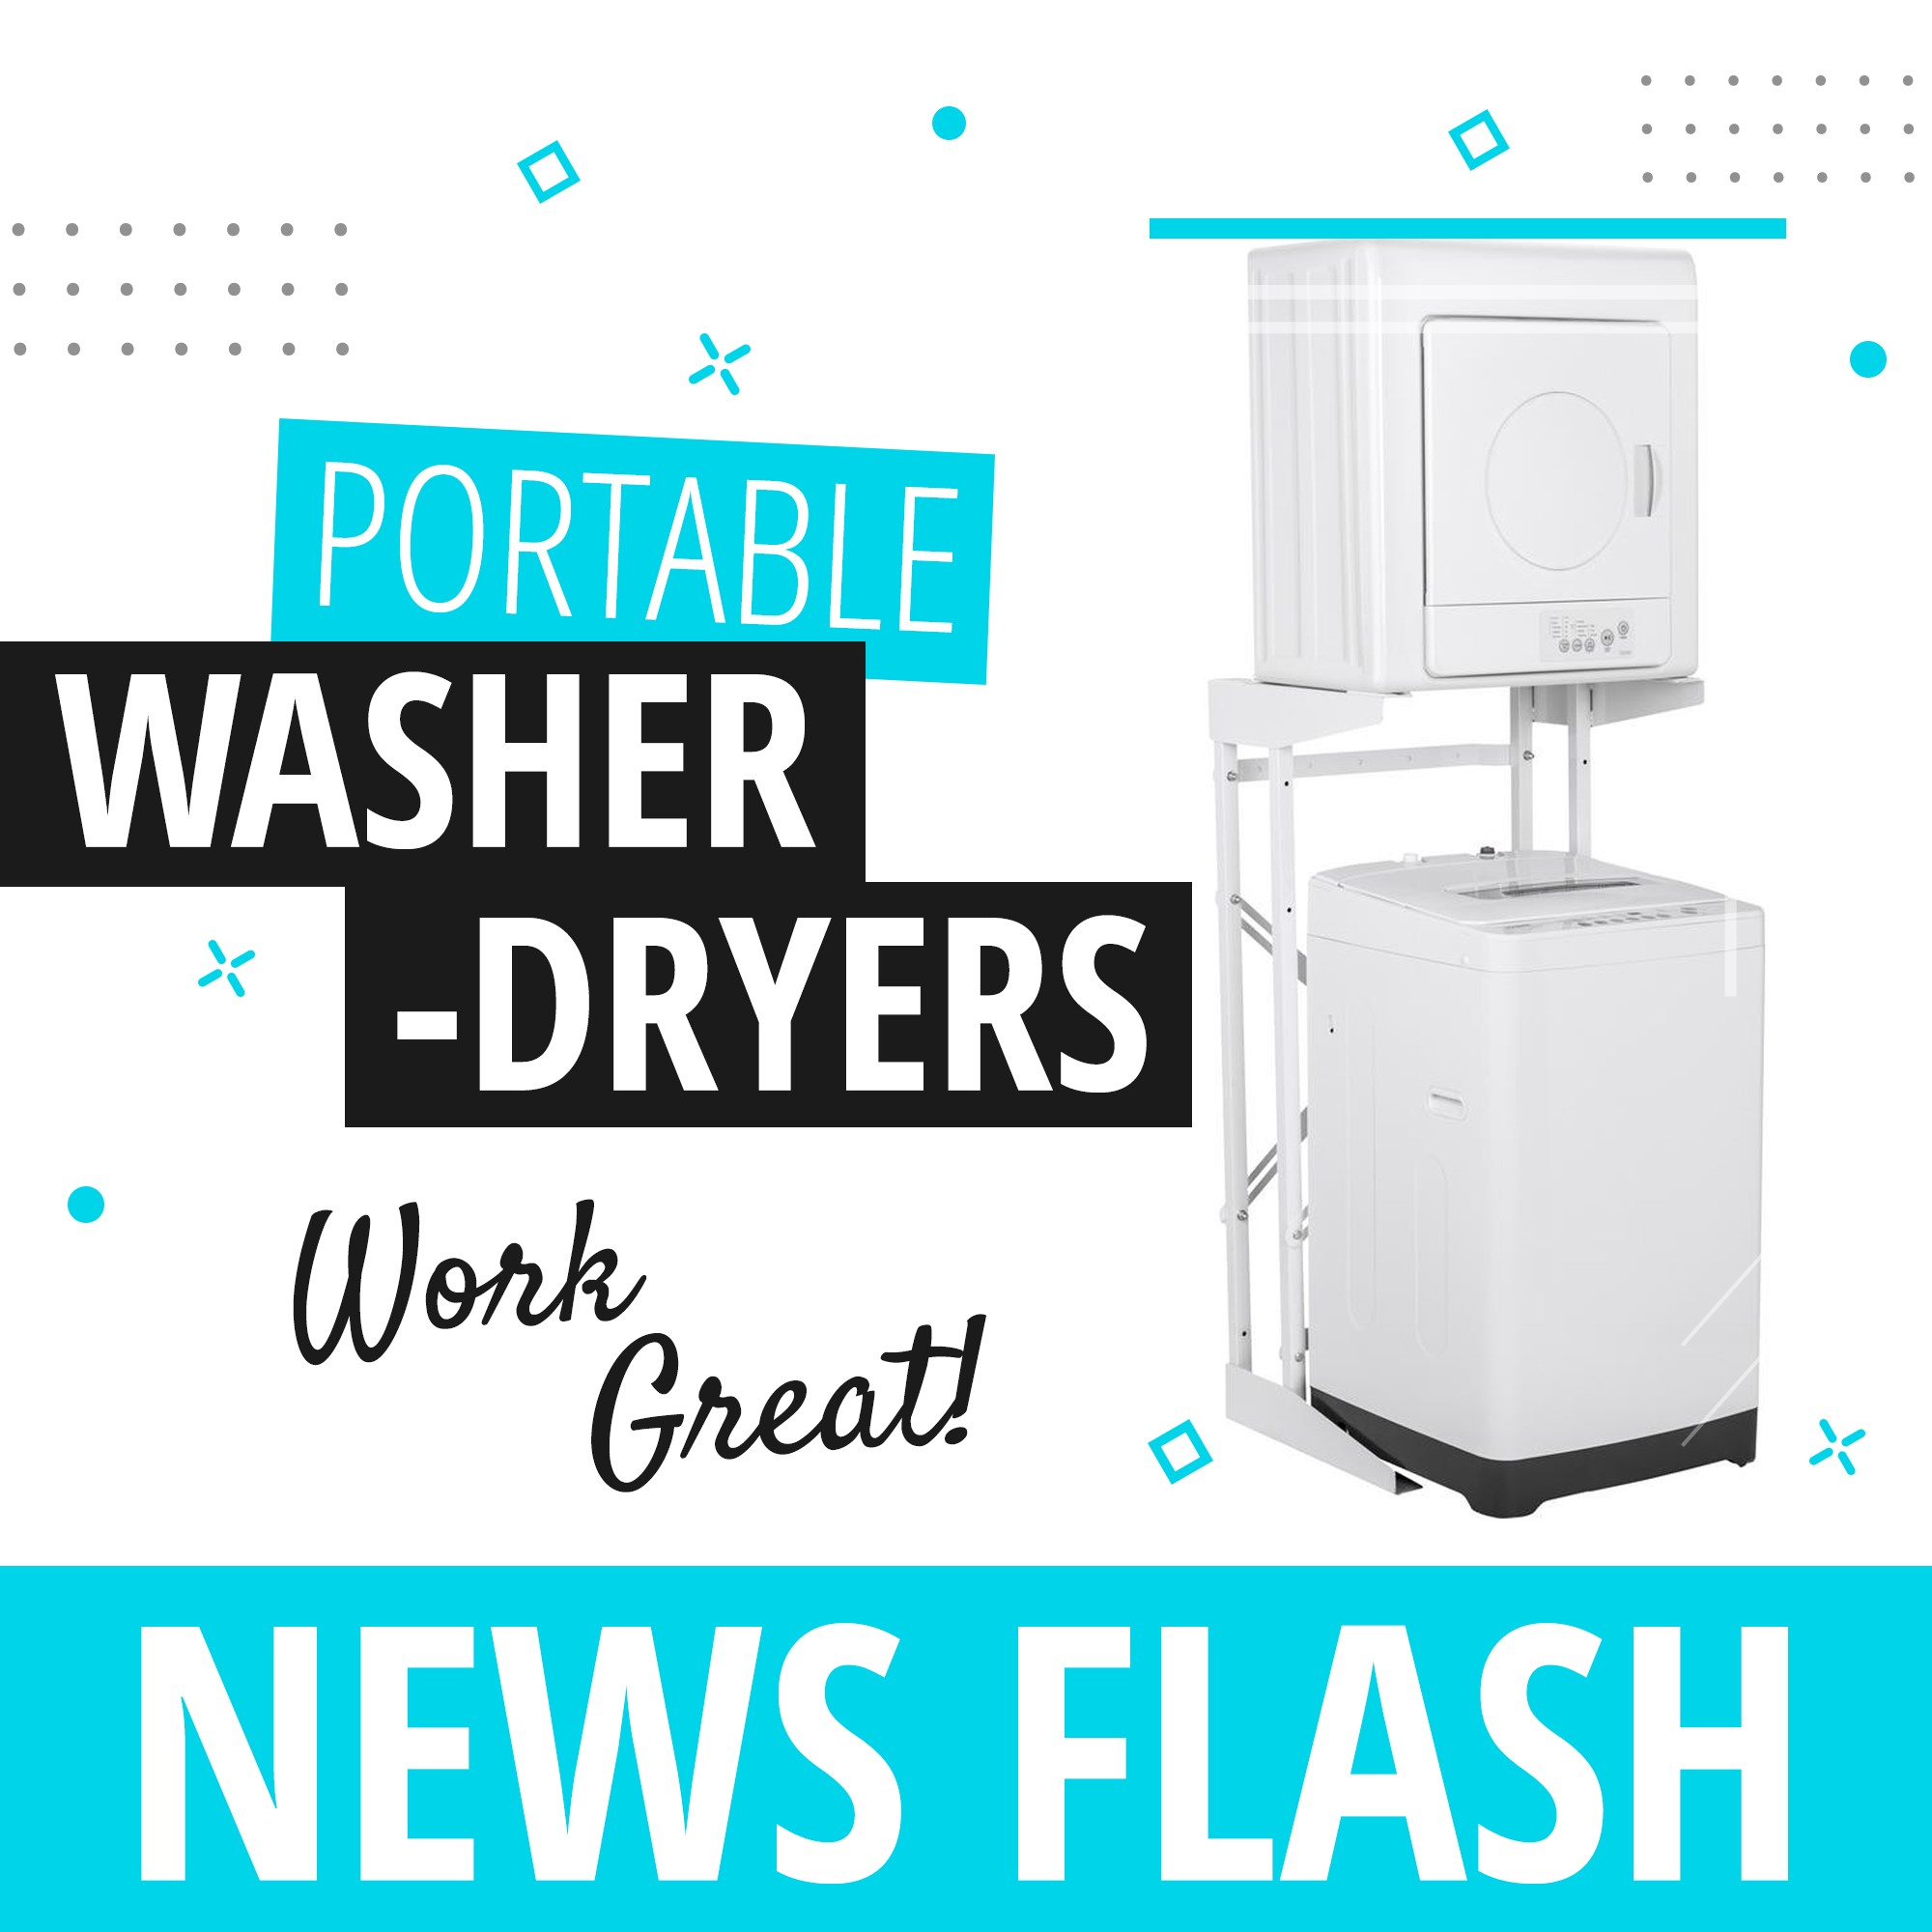 Portable Washer Dryers